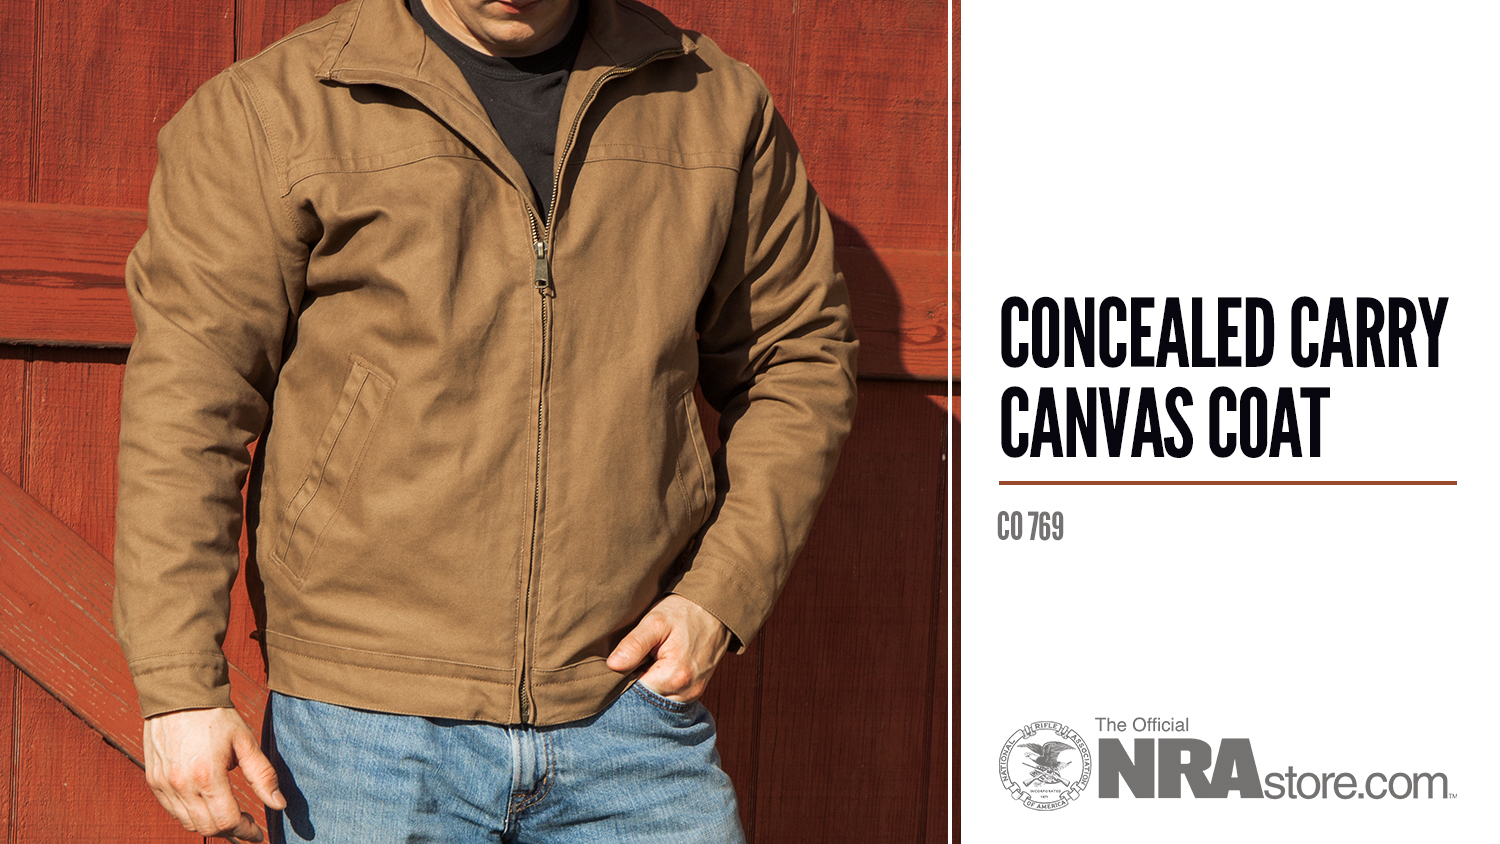 NRAstore Product Highlight: Concealed Carry Canvas Coat